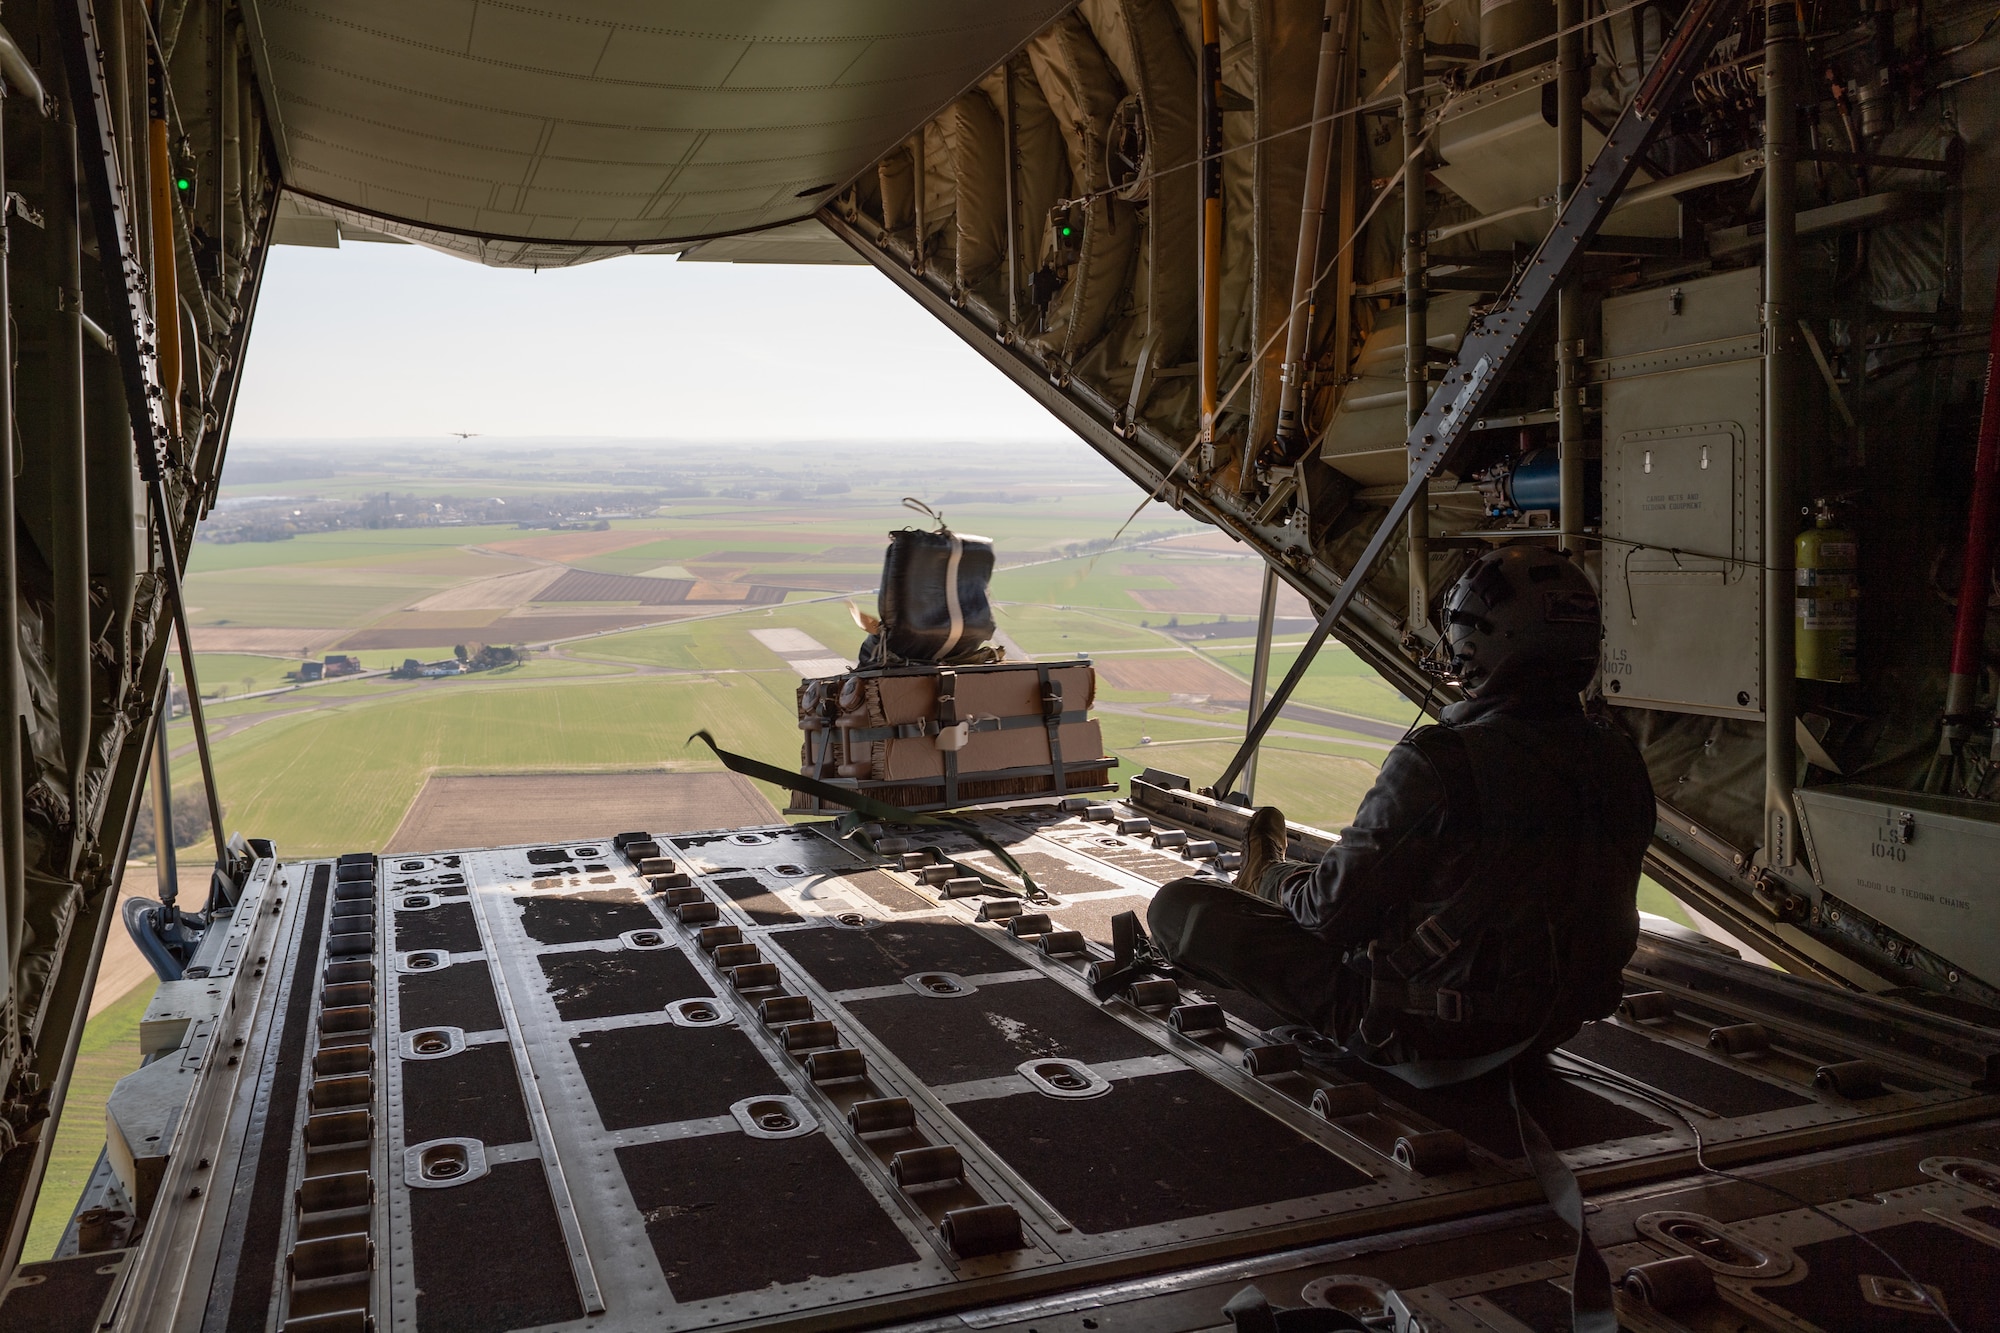 Airman sitting on an aircraft as cargo drops over edge.